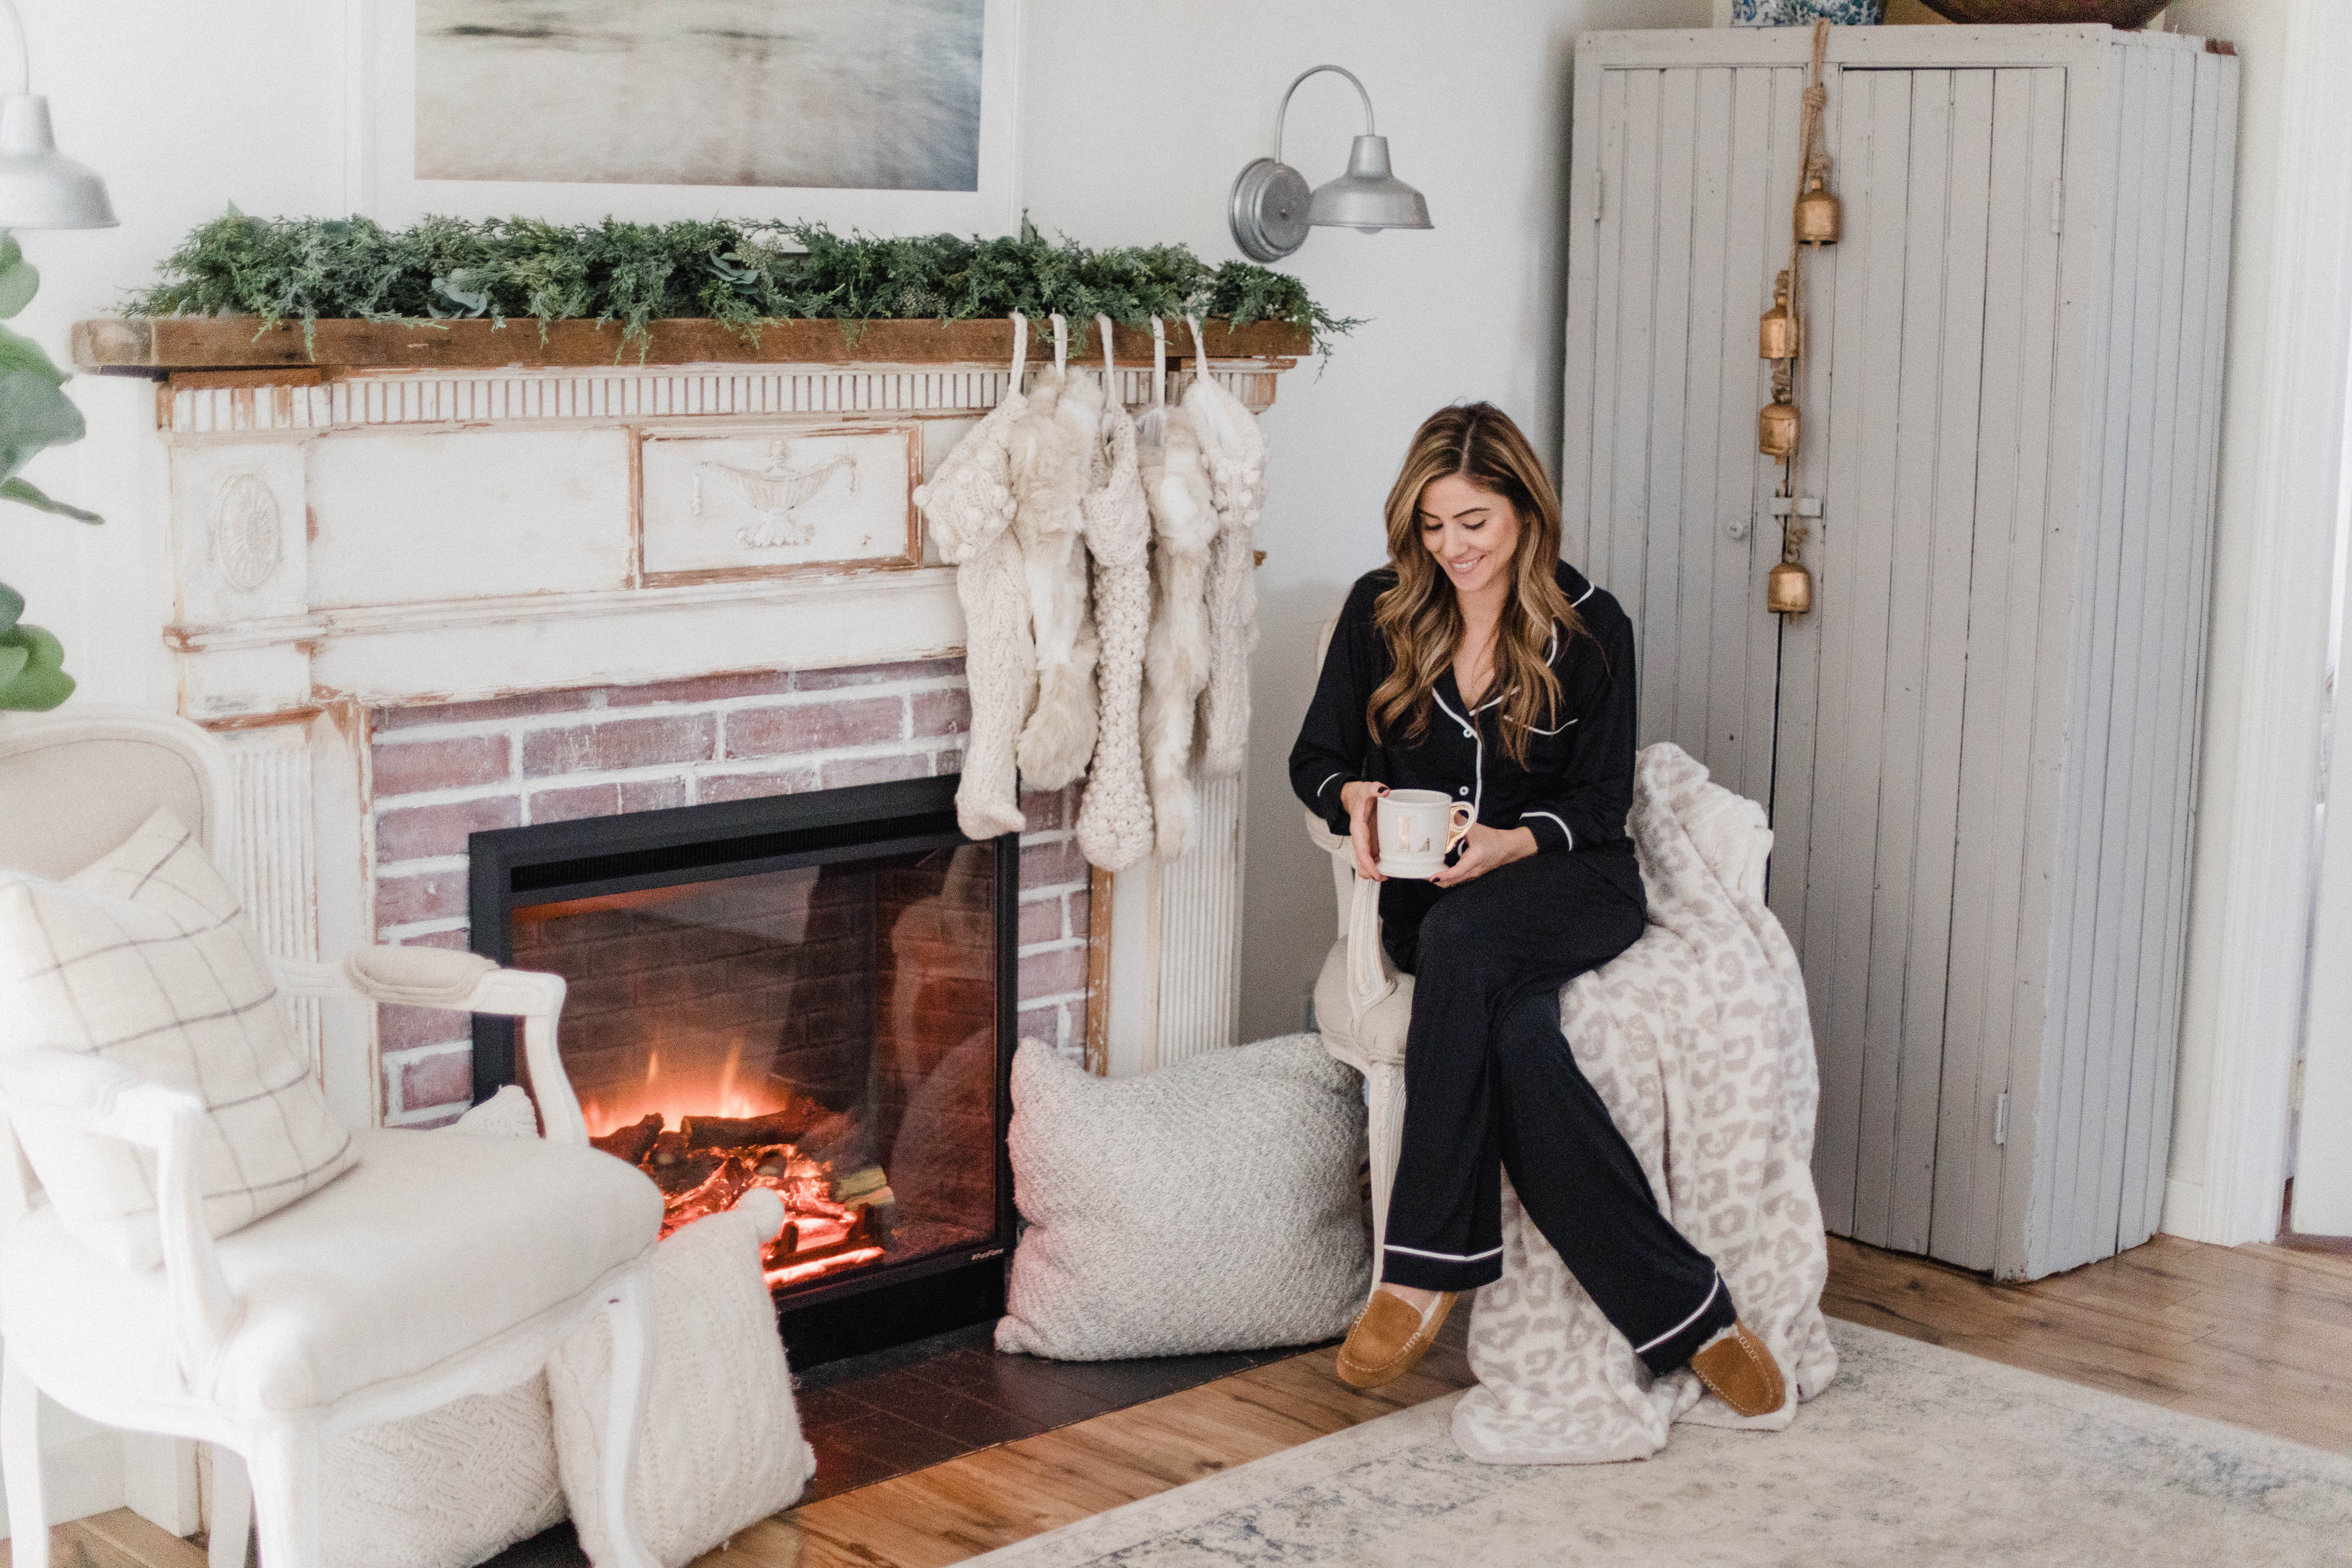 Connecticut life and style blogger Lauren McBride shares Cozy Gifts with QVC including picks from Barefoot Dreams, Koolaburra by Ugg, and more. Featuring gifts in a variety of prices!